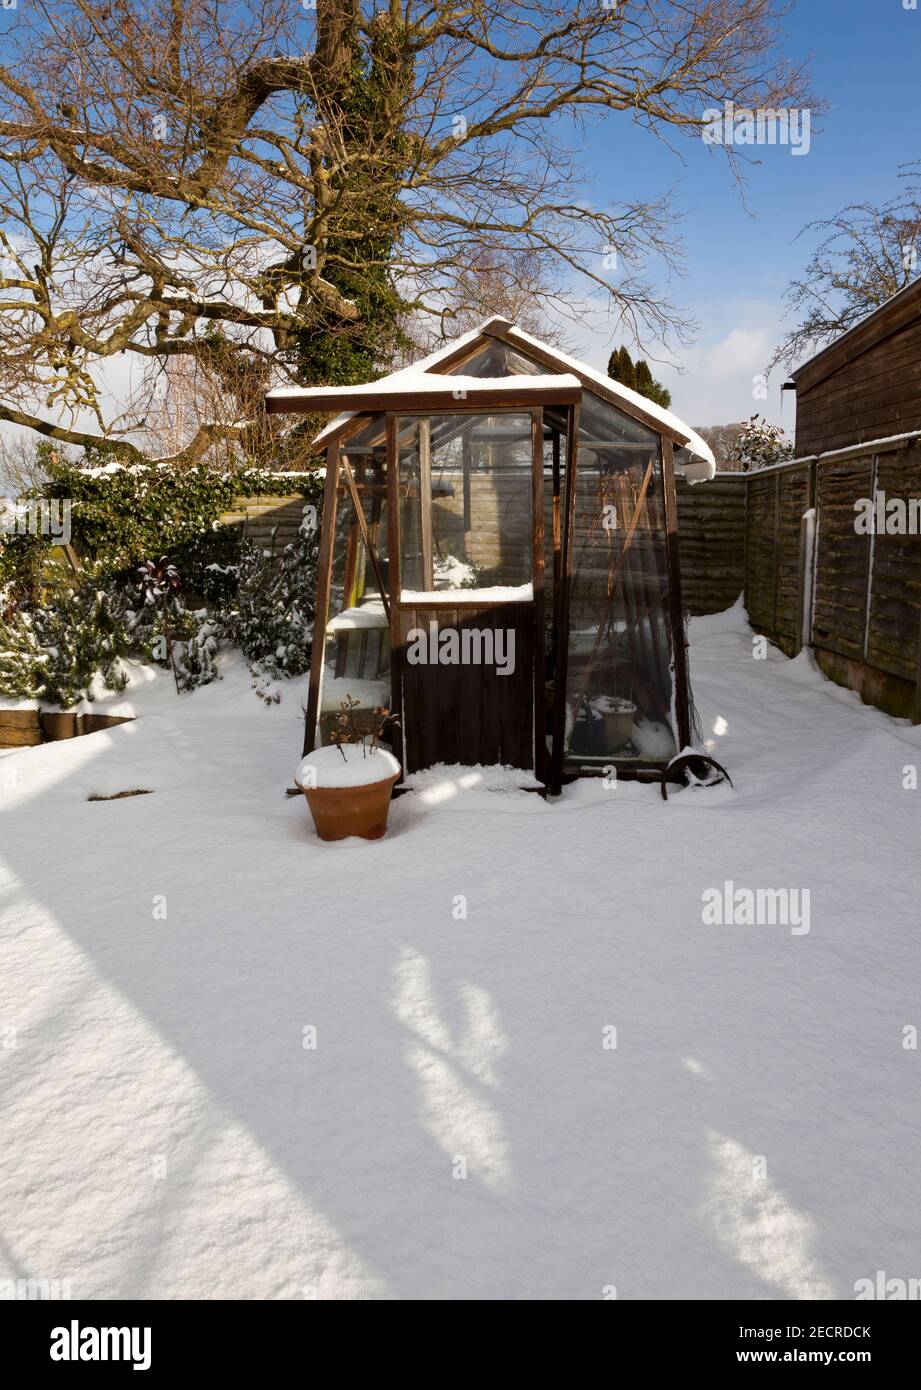 A snow covered greenhouse Stock Photo